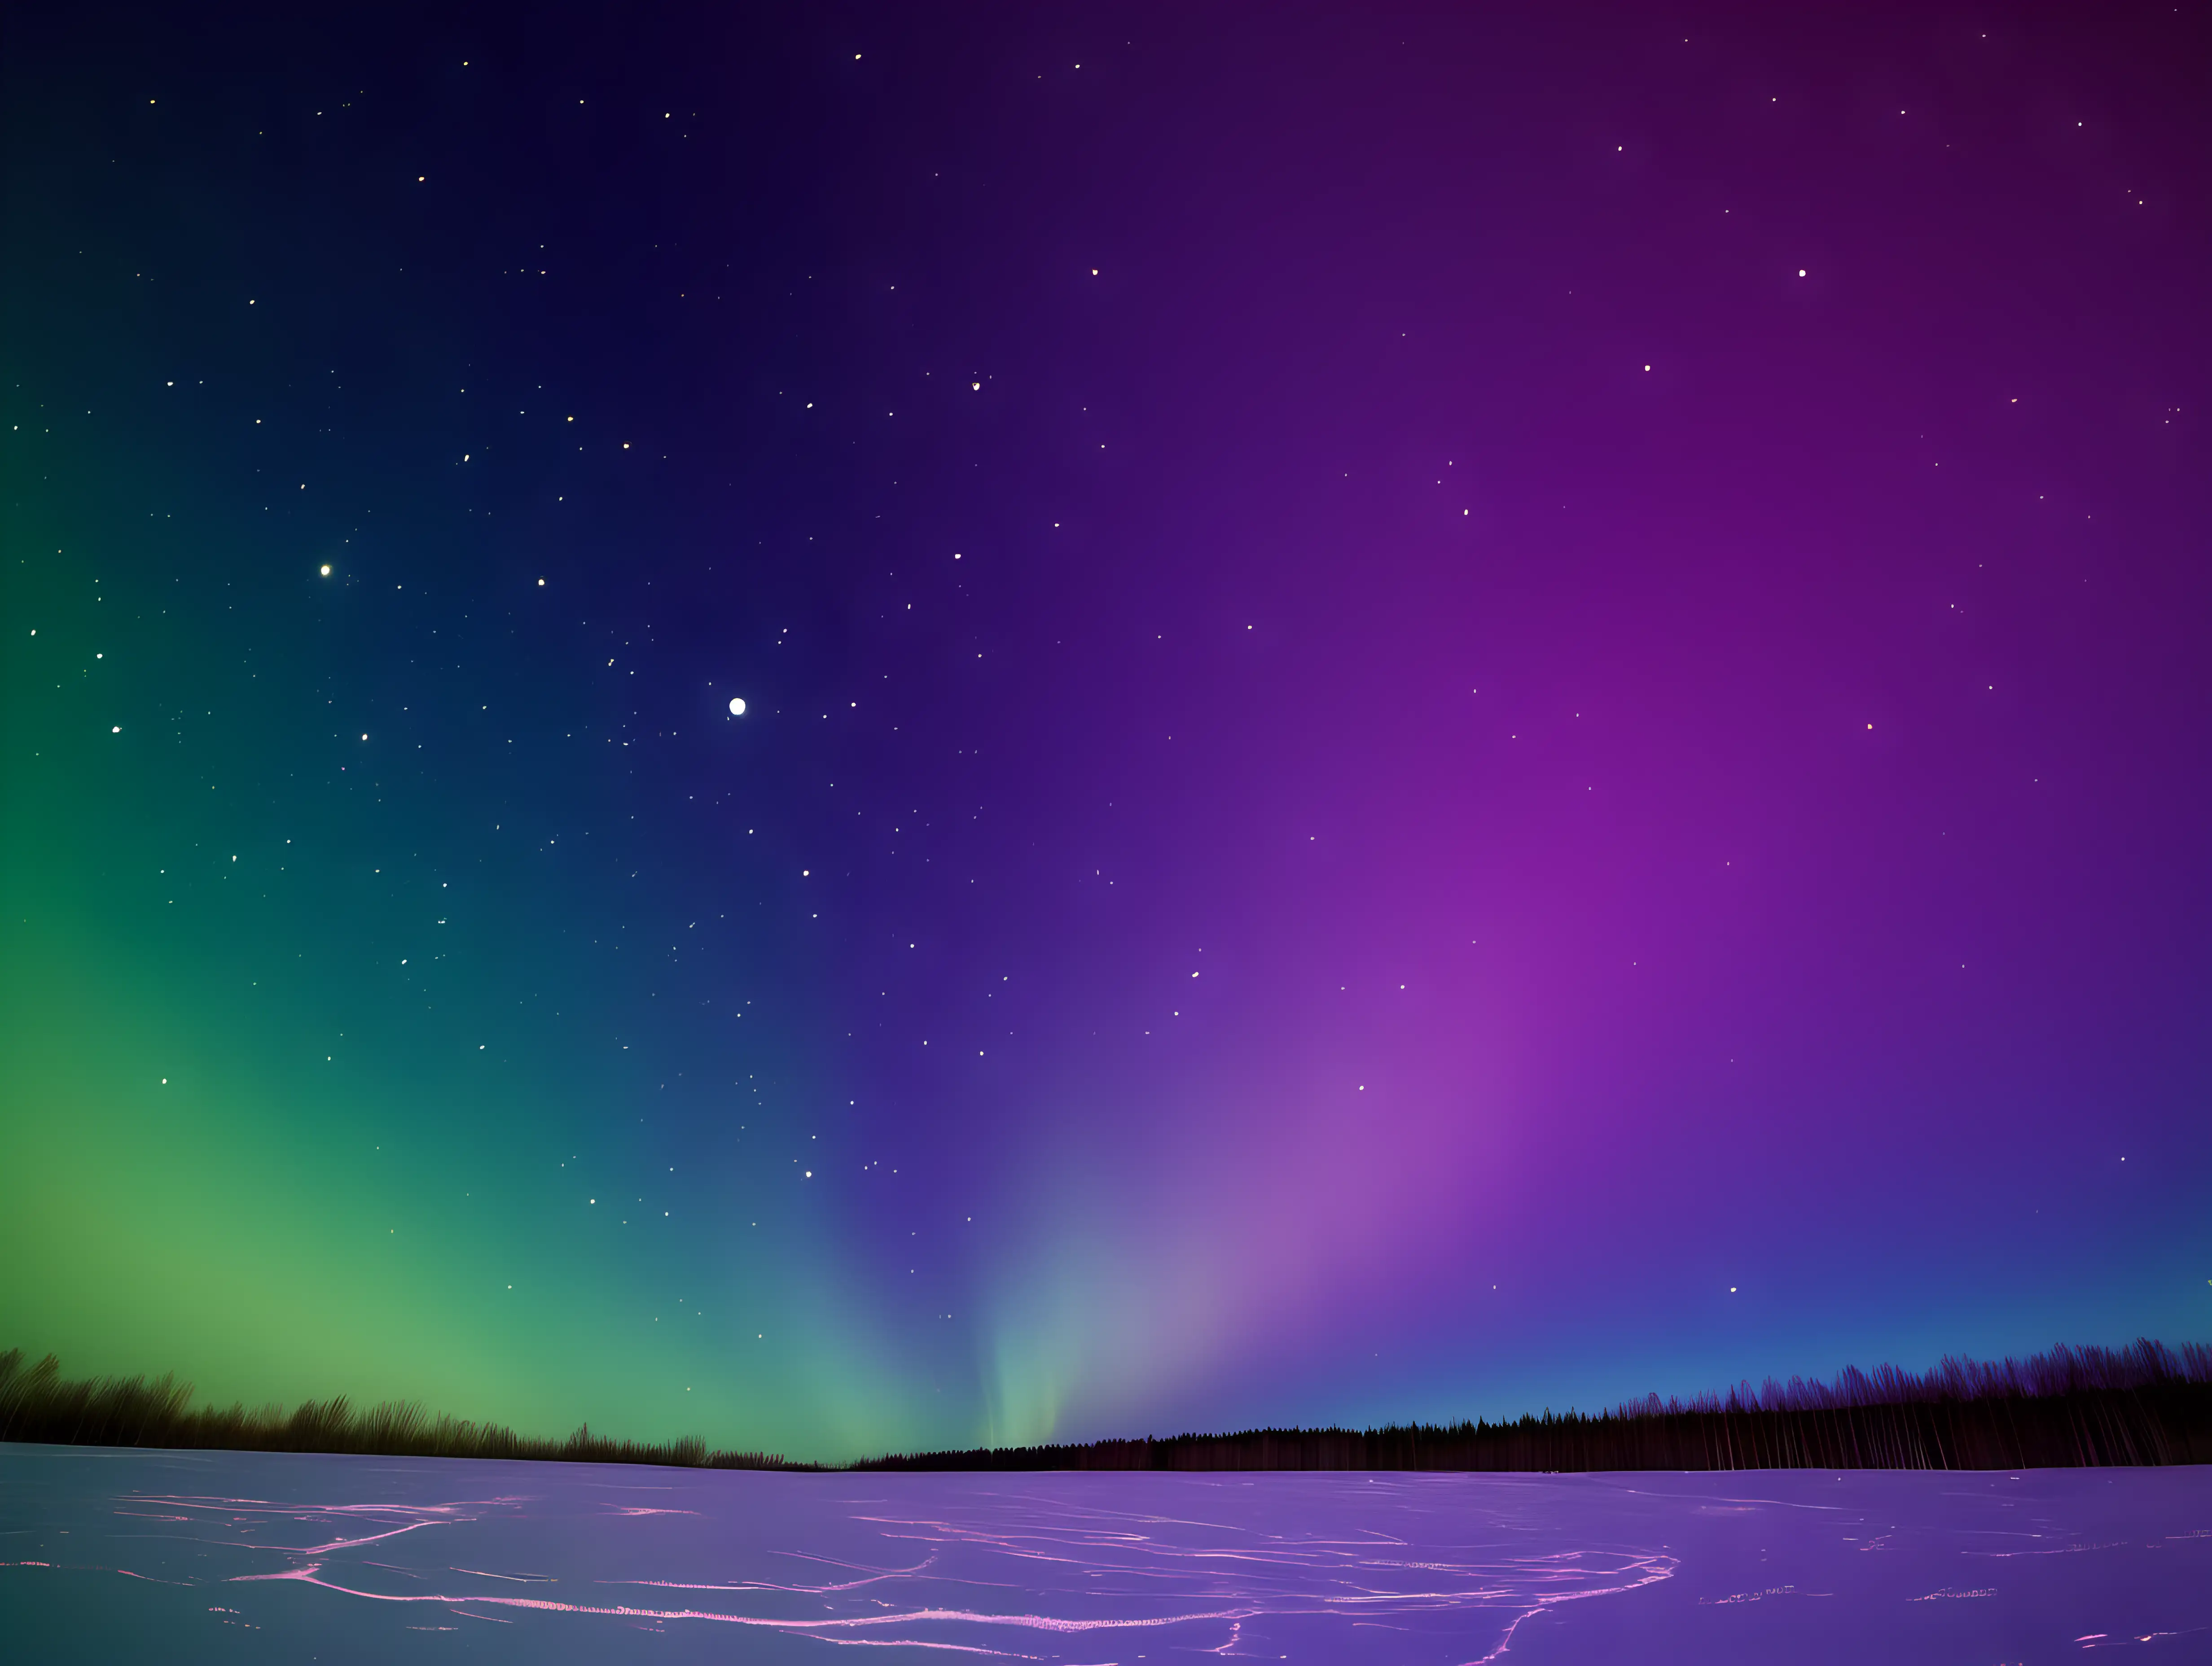 Starry Northern Lights Sky with Full Moon and Vivid Colors